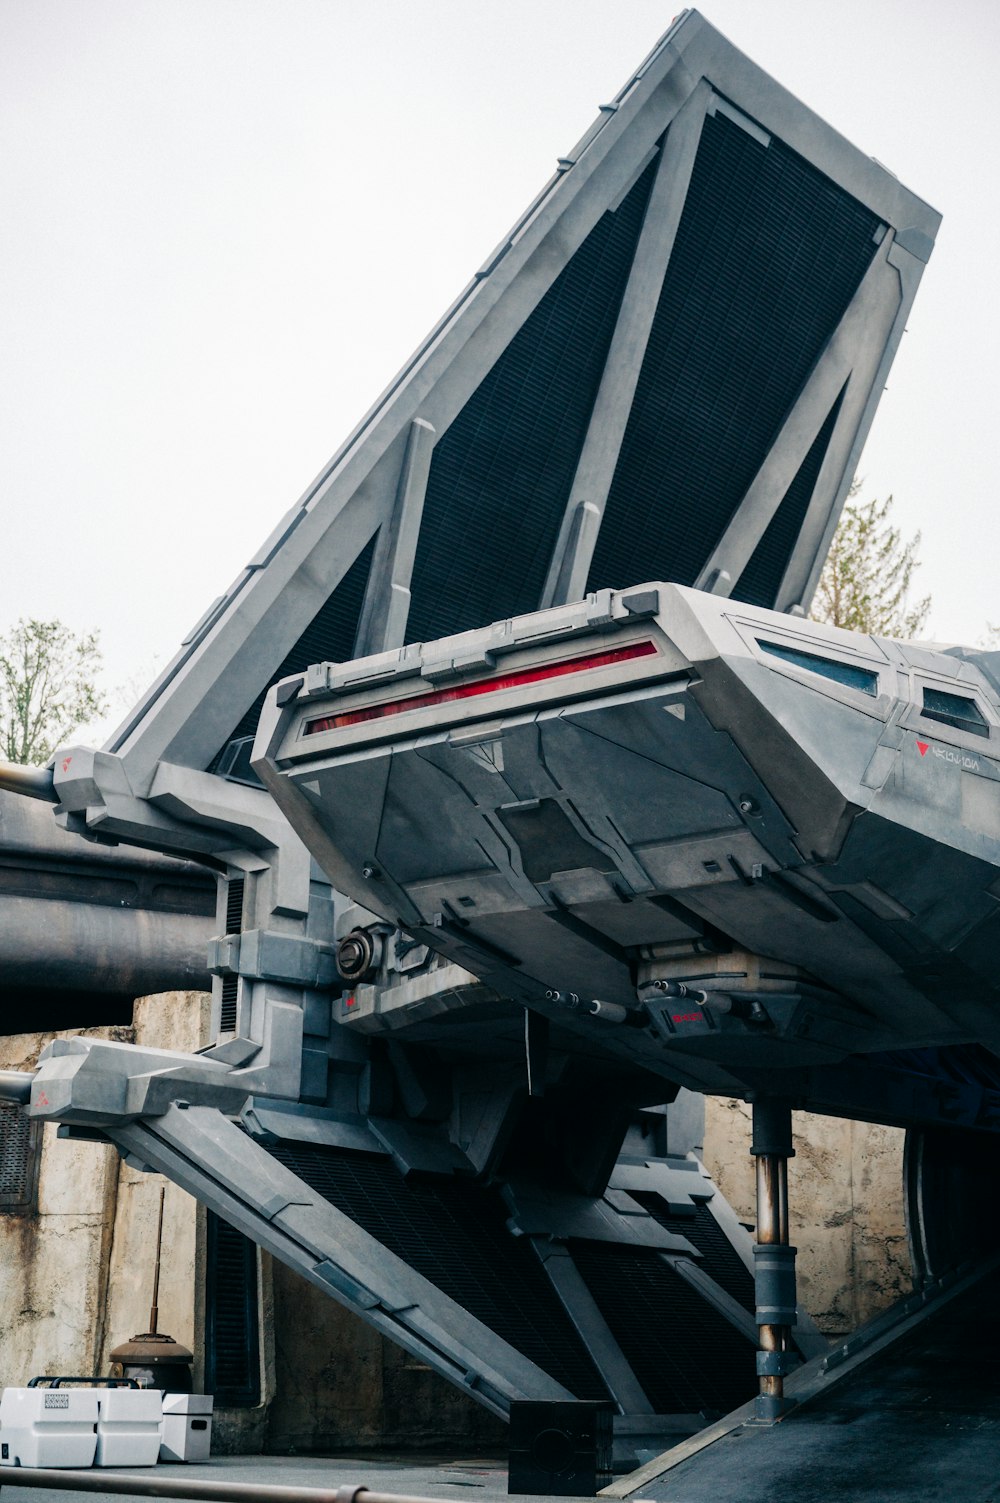 a star wars vehicle parked in front of a building